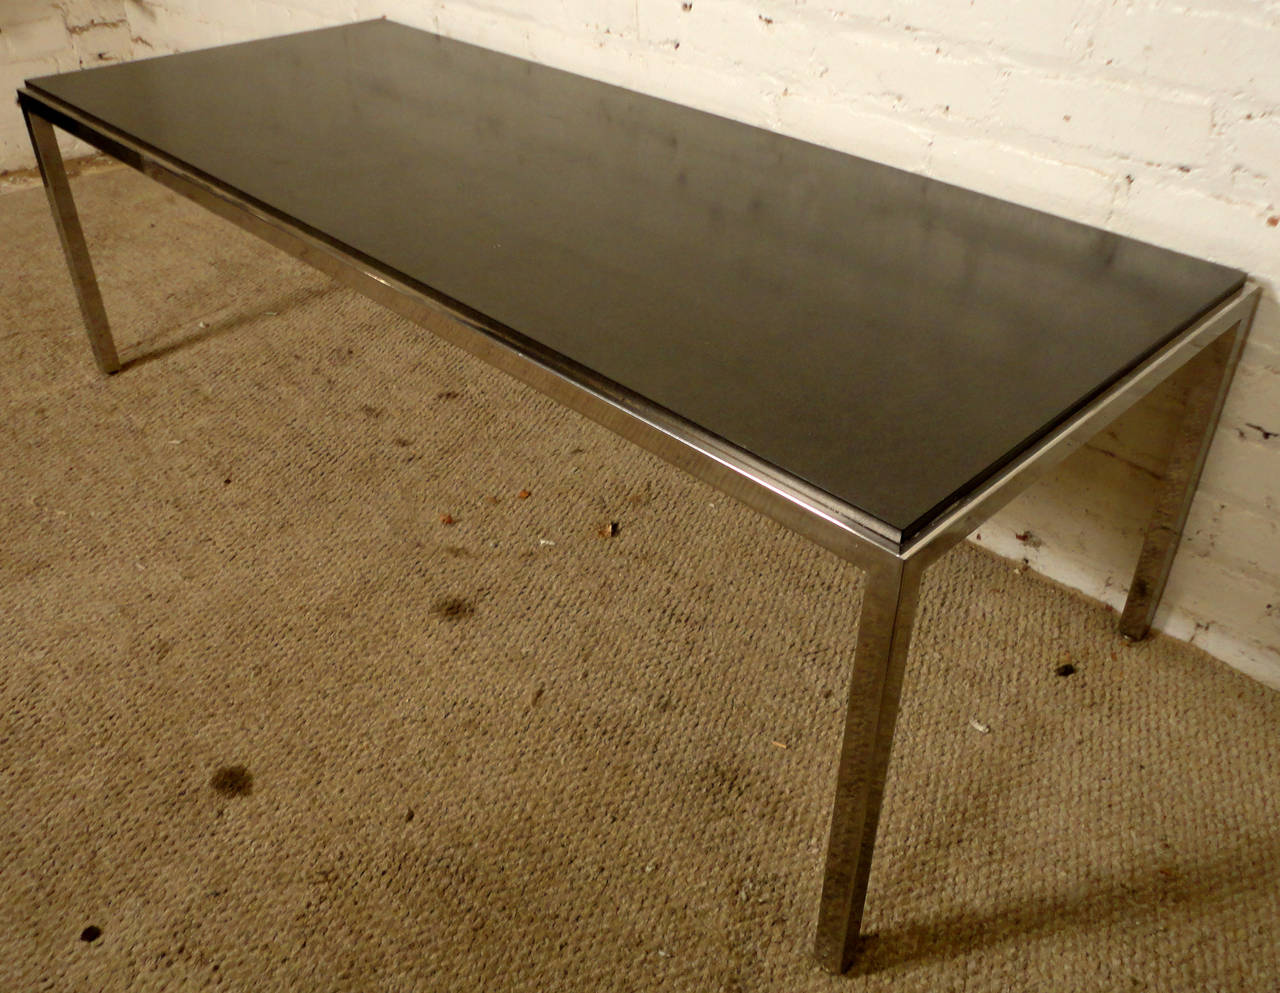 American Sleek Mid-Century Chrome & Black Top Coffee Table by Directional